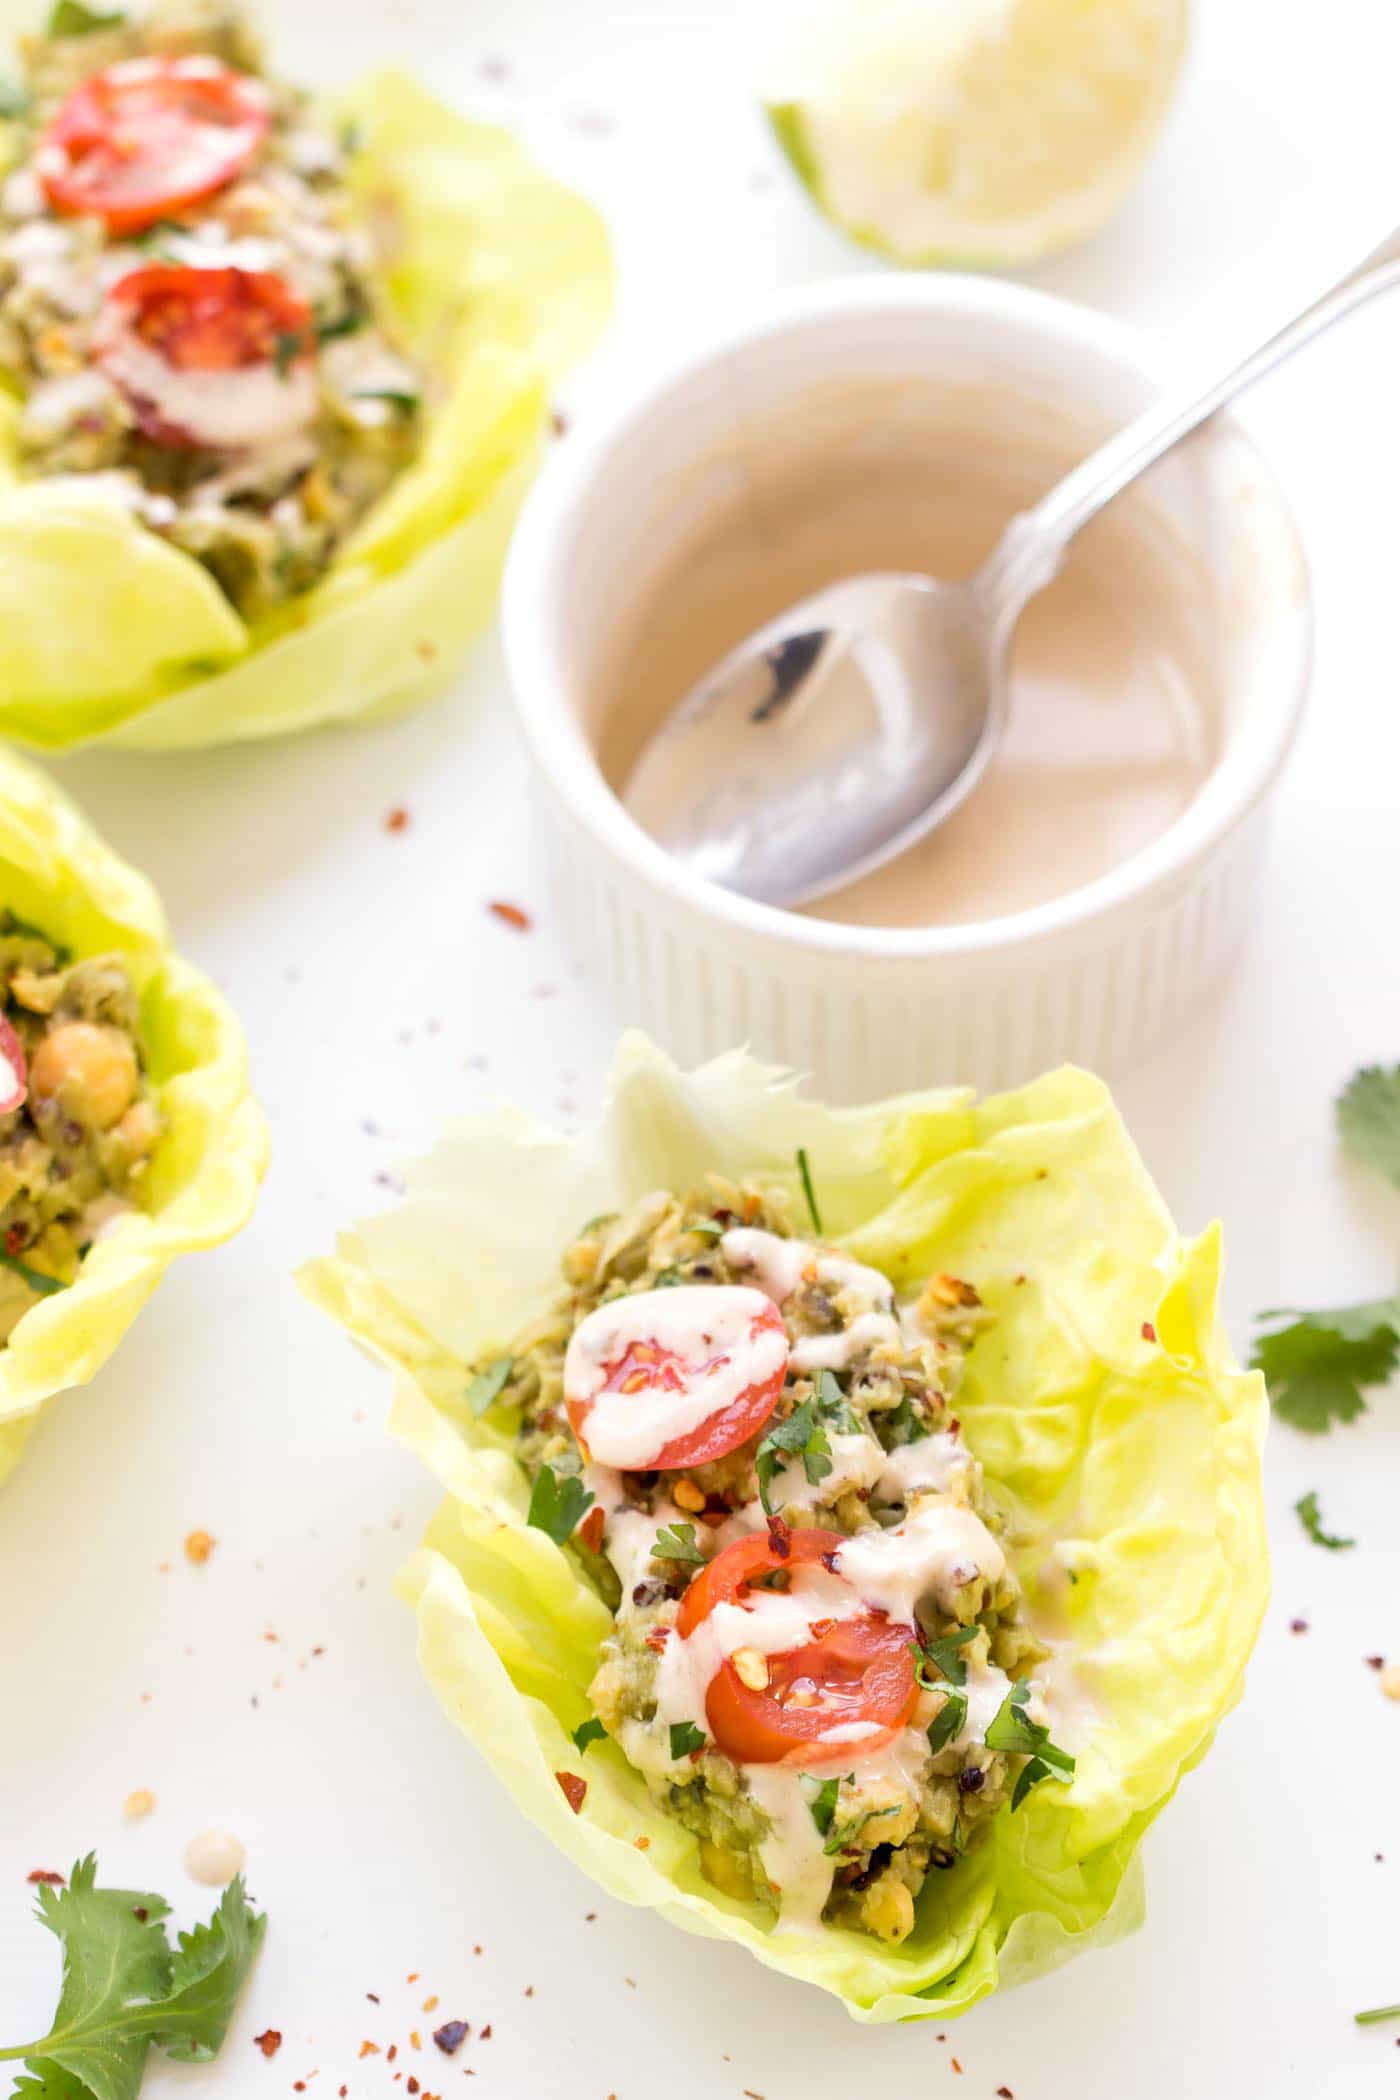 My new FAVE lunch is these quinoa lettuce wraps with a smashed chickpea and avocado filling! Kind of like a cross between hummus and guacamole only WAY BETTER!